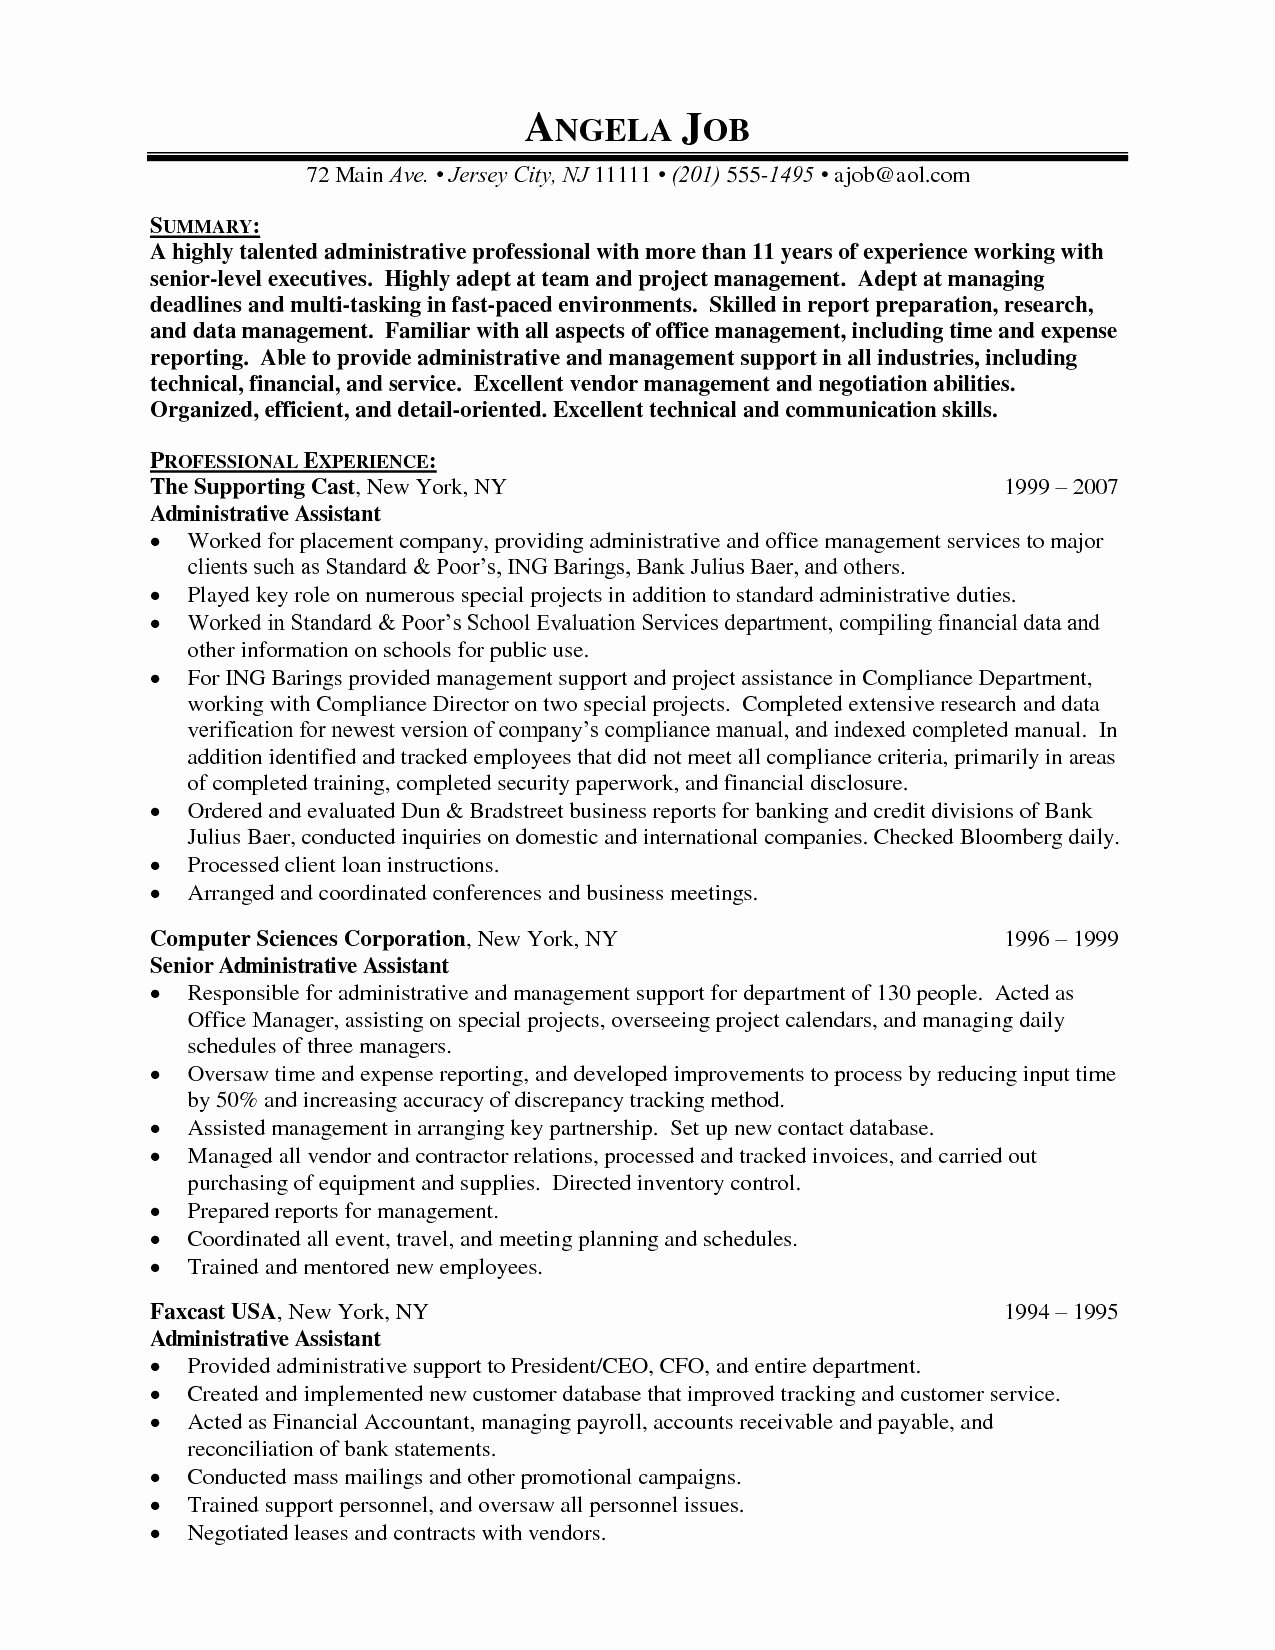 Best Sites to Post Resume Good Writing Examples How